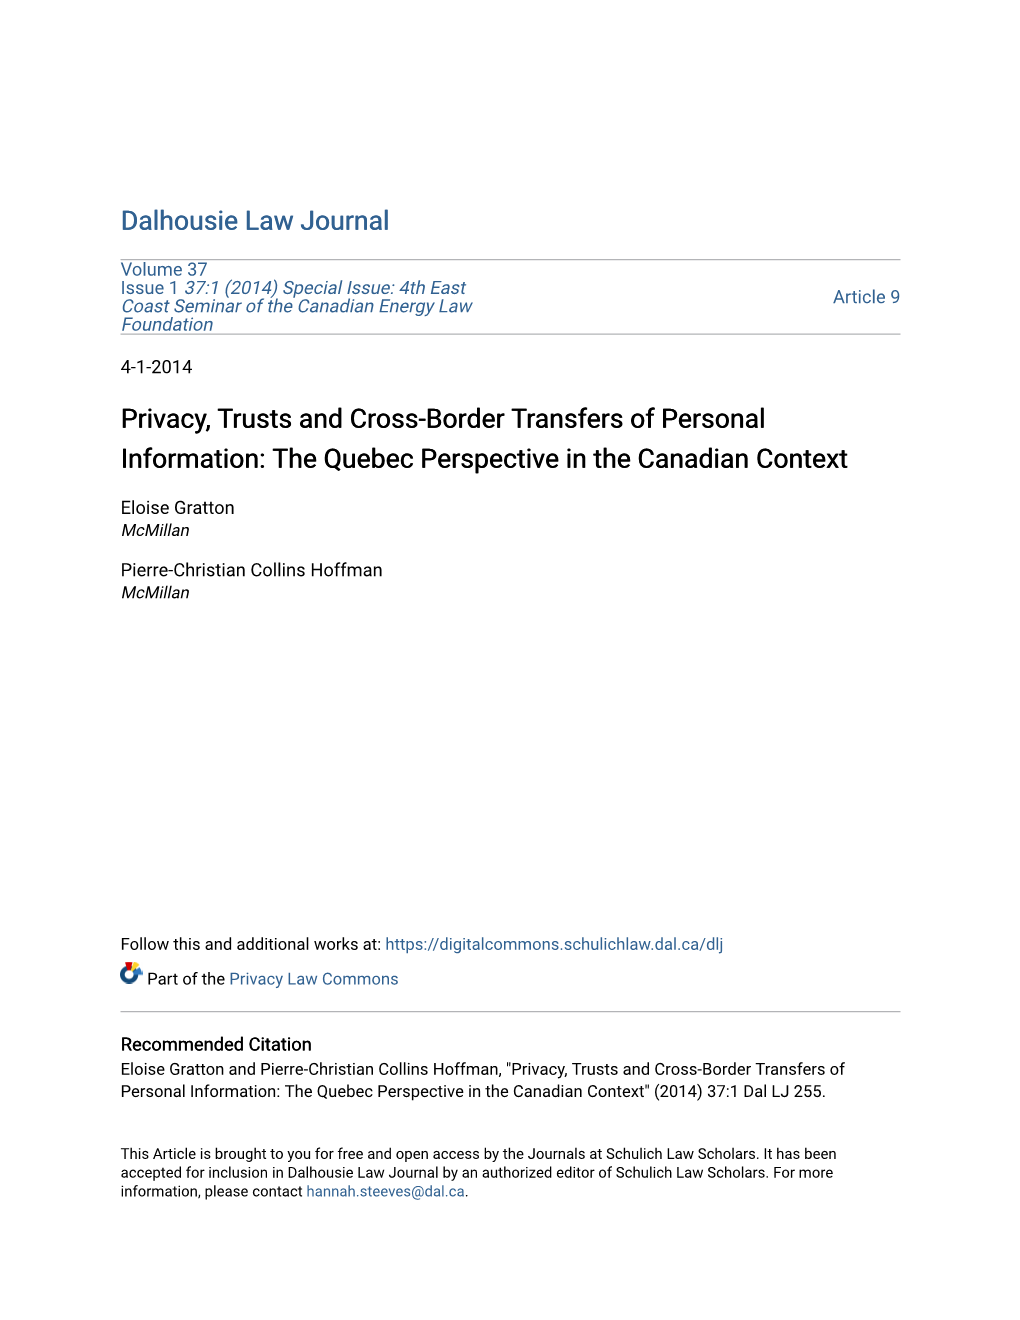 Privacy, Trusts and Cross-Border Transfers of Personal Information: the Quebec Perspective in the Canadian Context